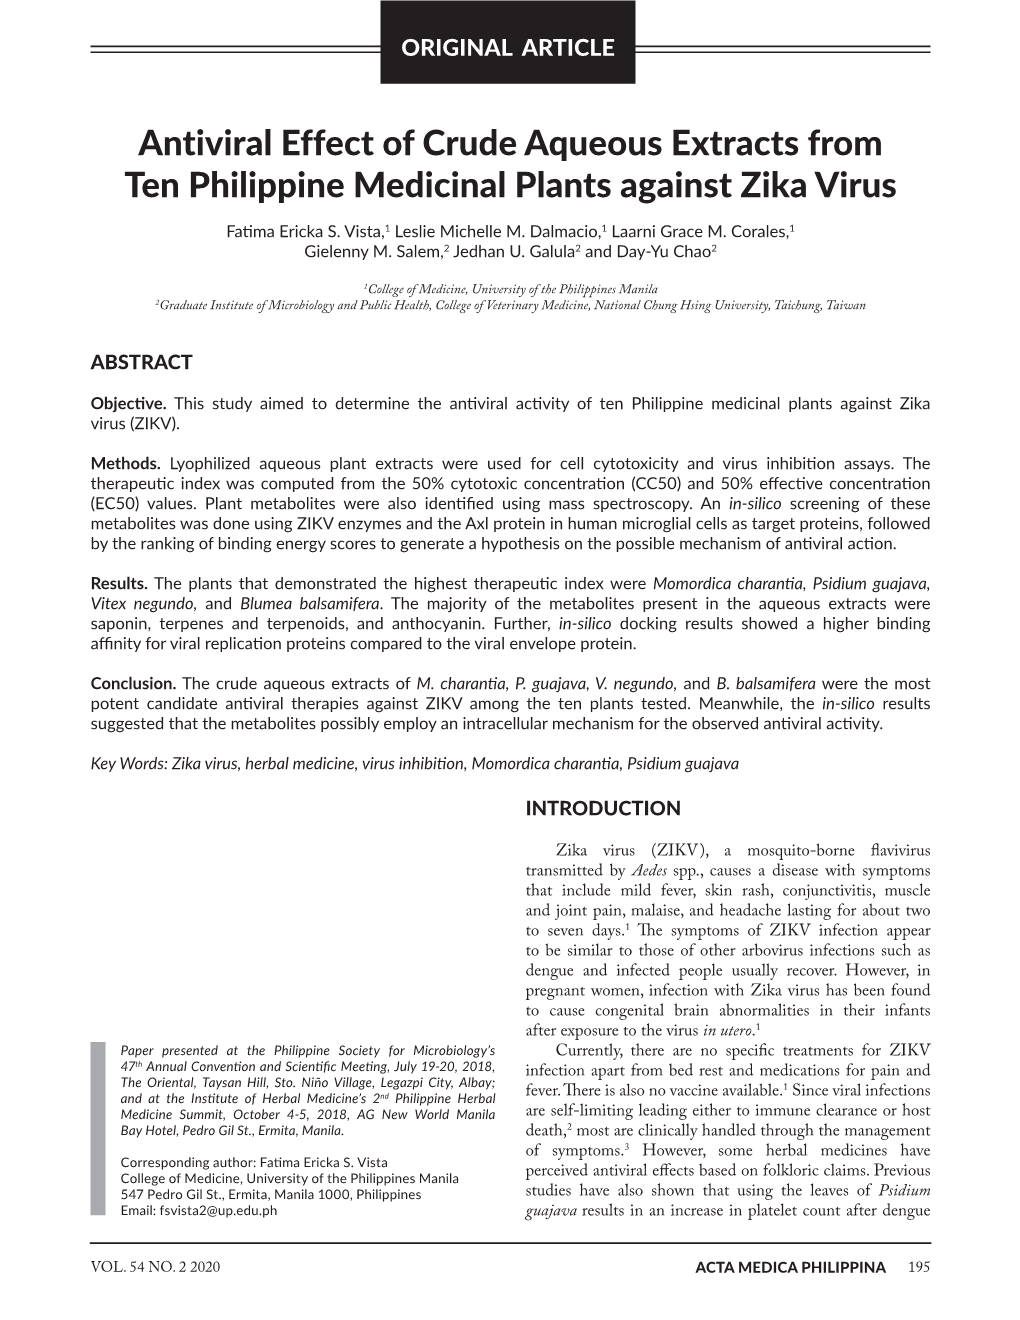 Antiviral Effect of Crude Aqueous Extracts from Ten Philippine Medicinal Plants Against Zika Virus